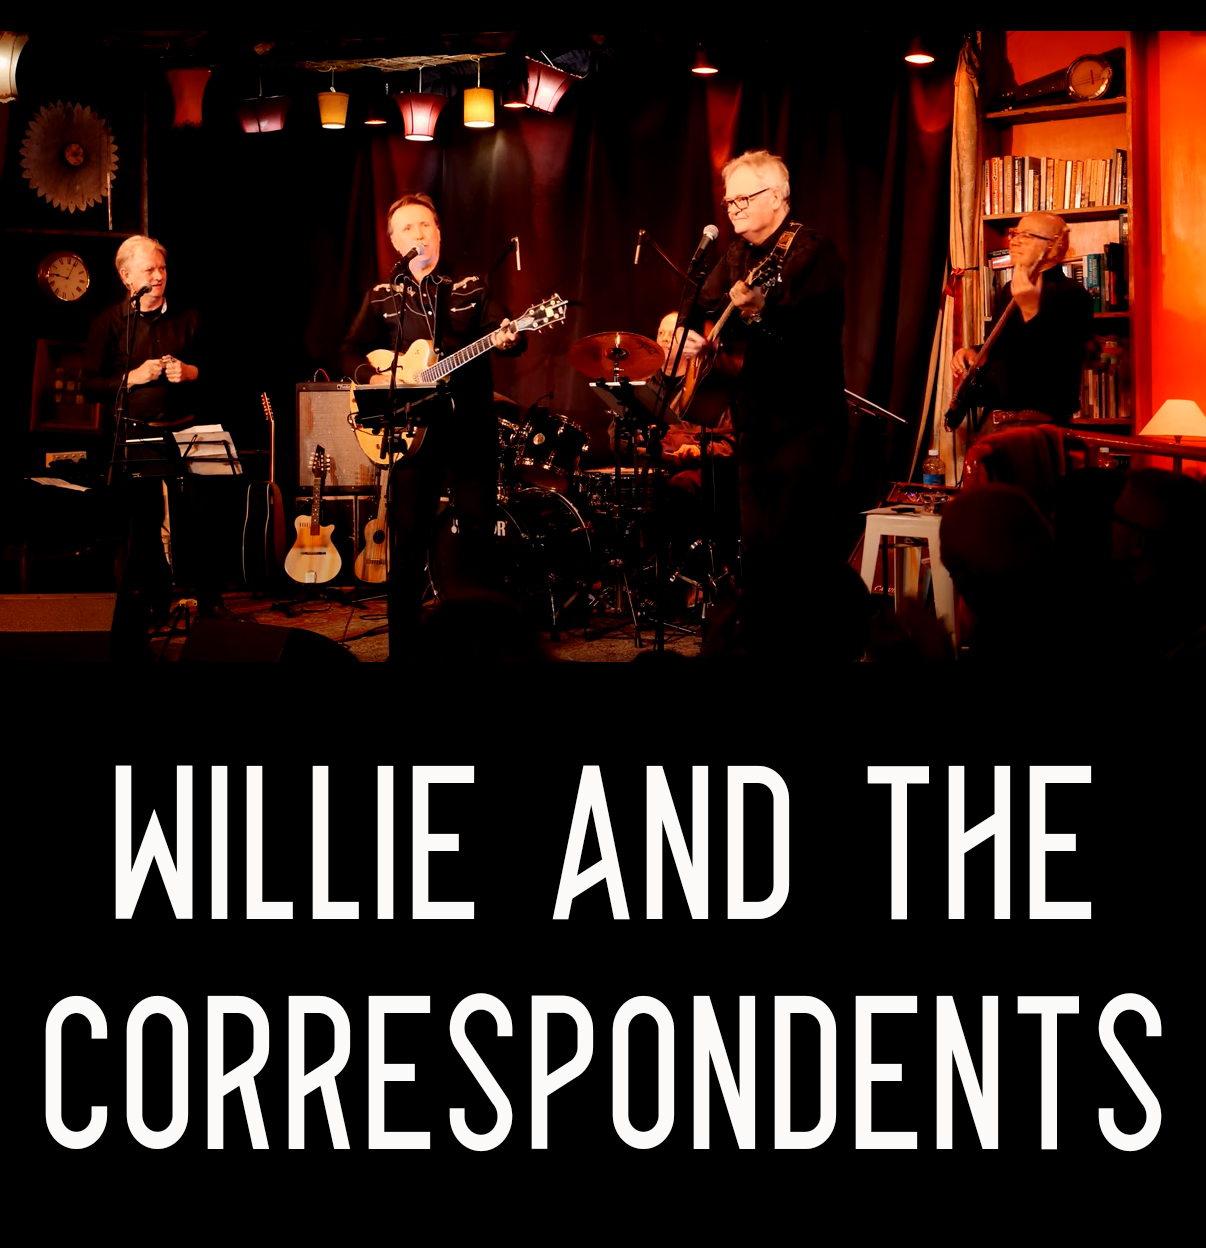 Willie and the Correspondents